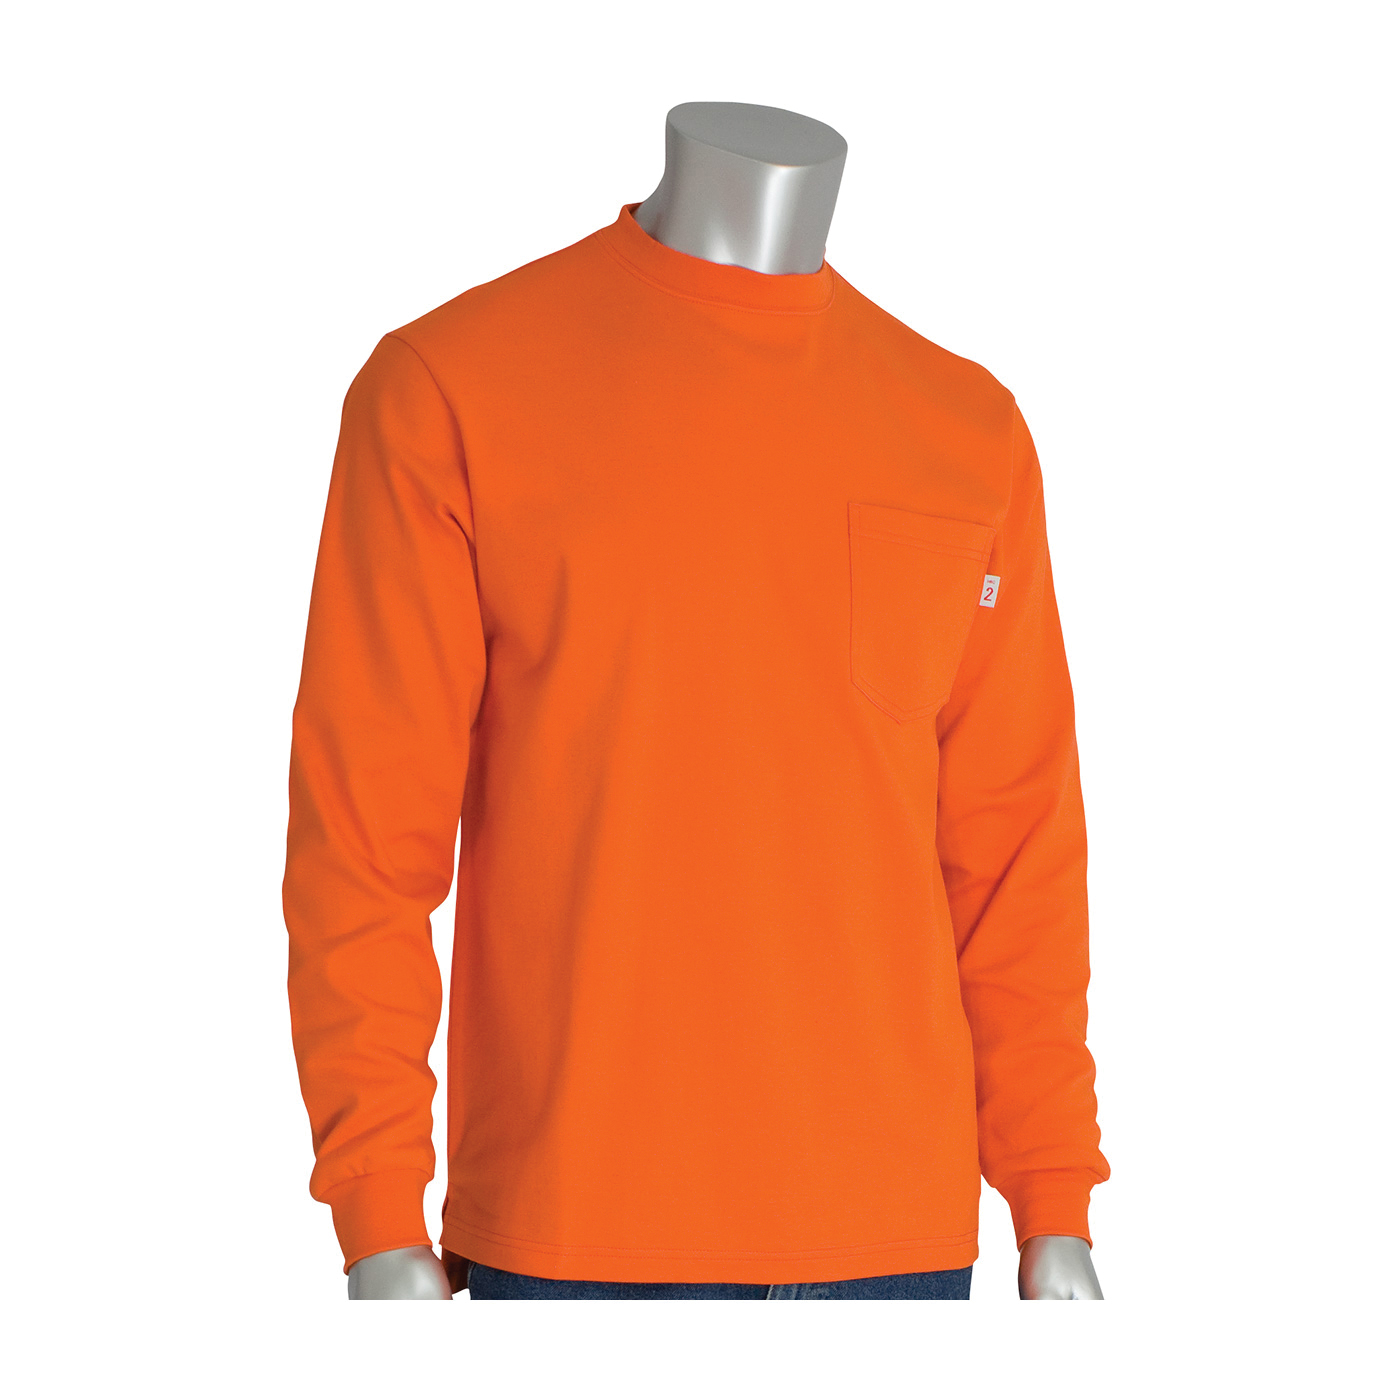 PIP® 385-FRLS-(OR)-2X Arc and Flame-Resistant Long Sleeve T-Shirt, 2XL, Orange, Cotton Interlock Knit, 33-1/2 in L